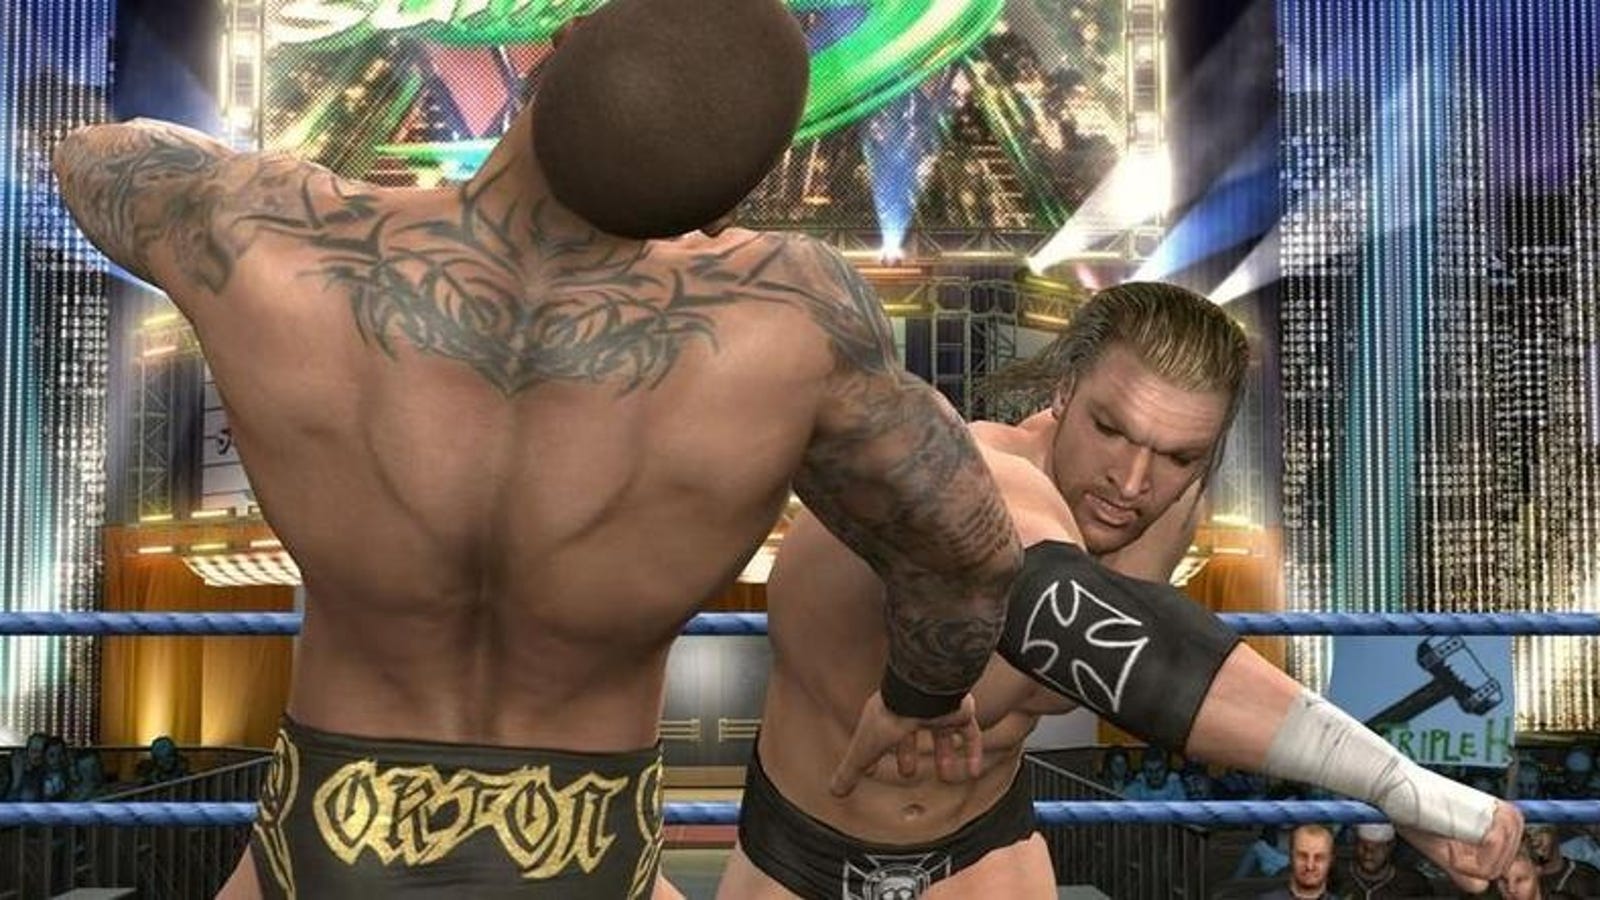 WWE Smackdown Vs. Raw 2010 Review: A Game For Smart People